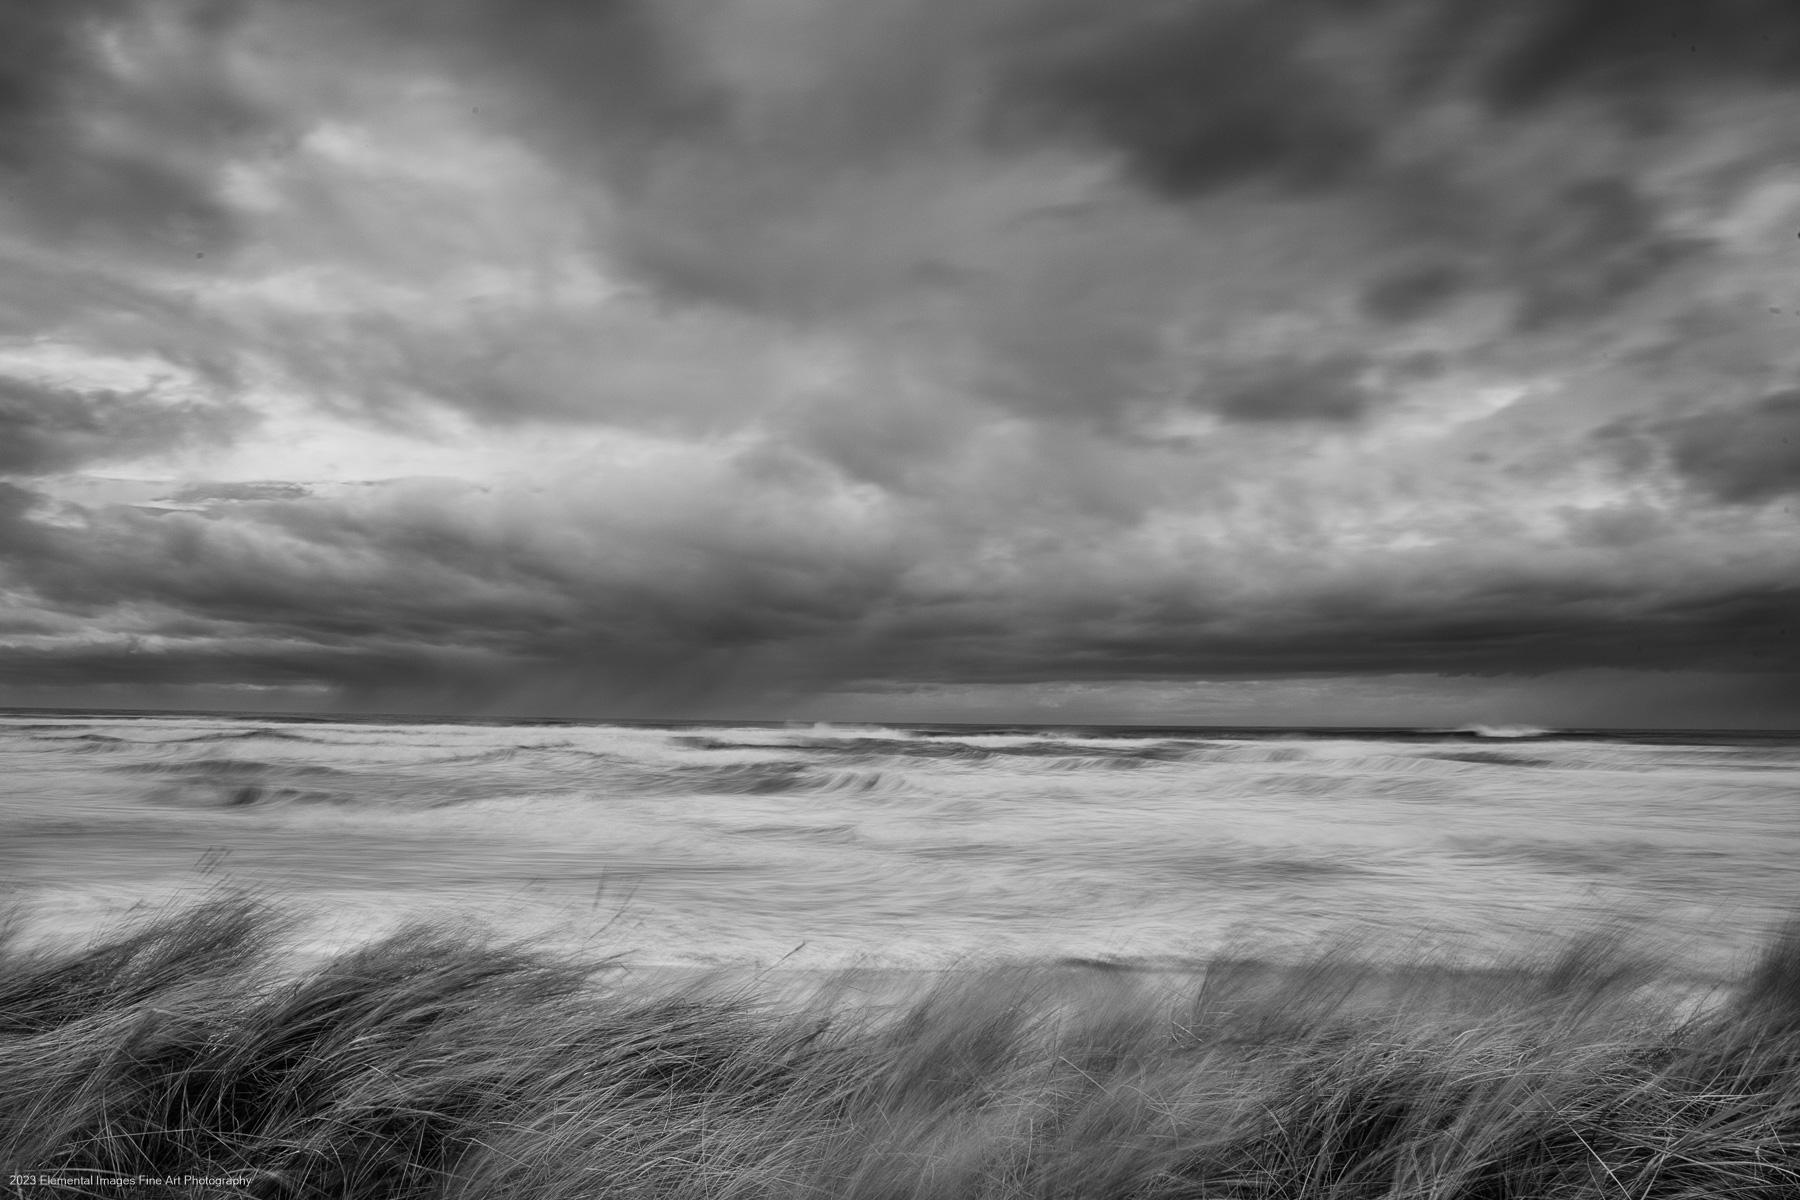 Windswept | Rockaway Beach | OR | USA - © 2023 Elemental Images Fine Art Photography - All Rights Reserved Worldwide